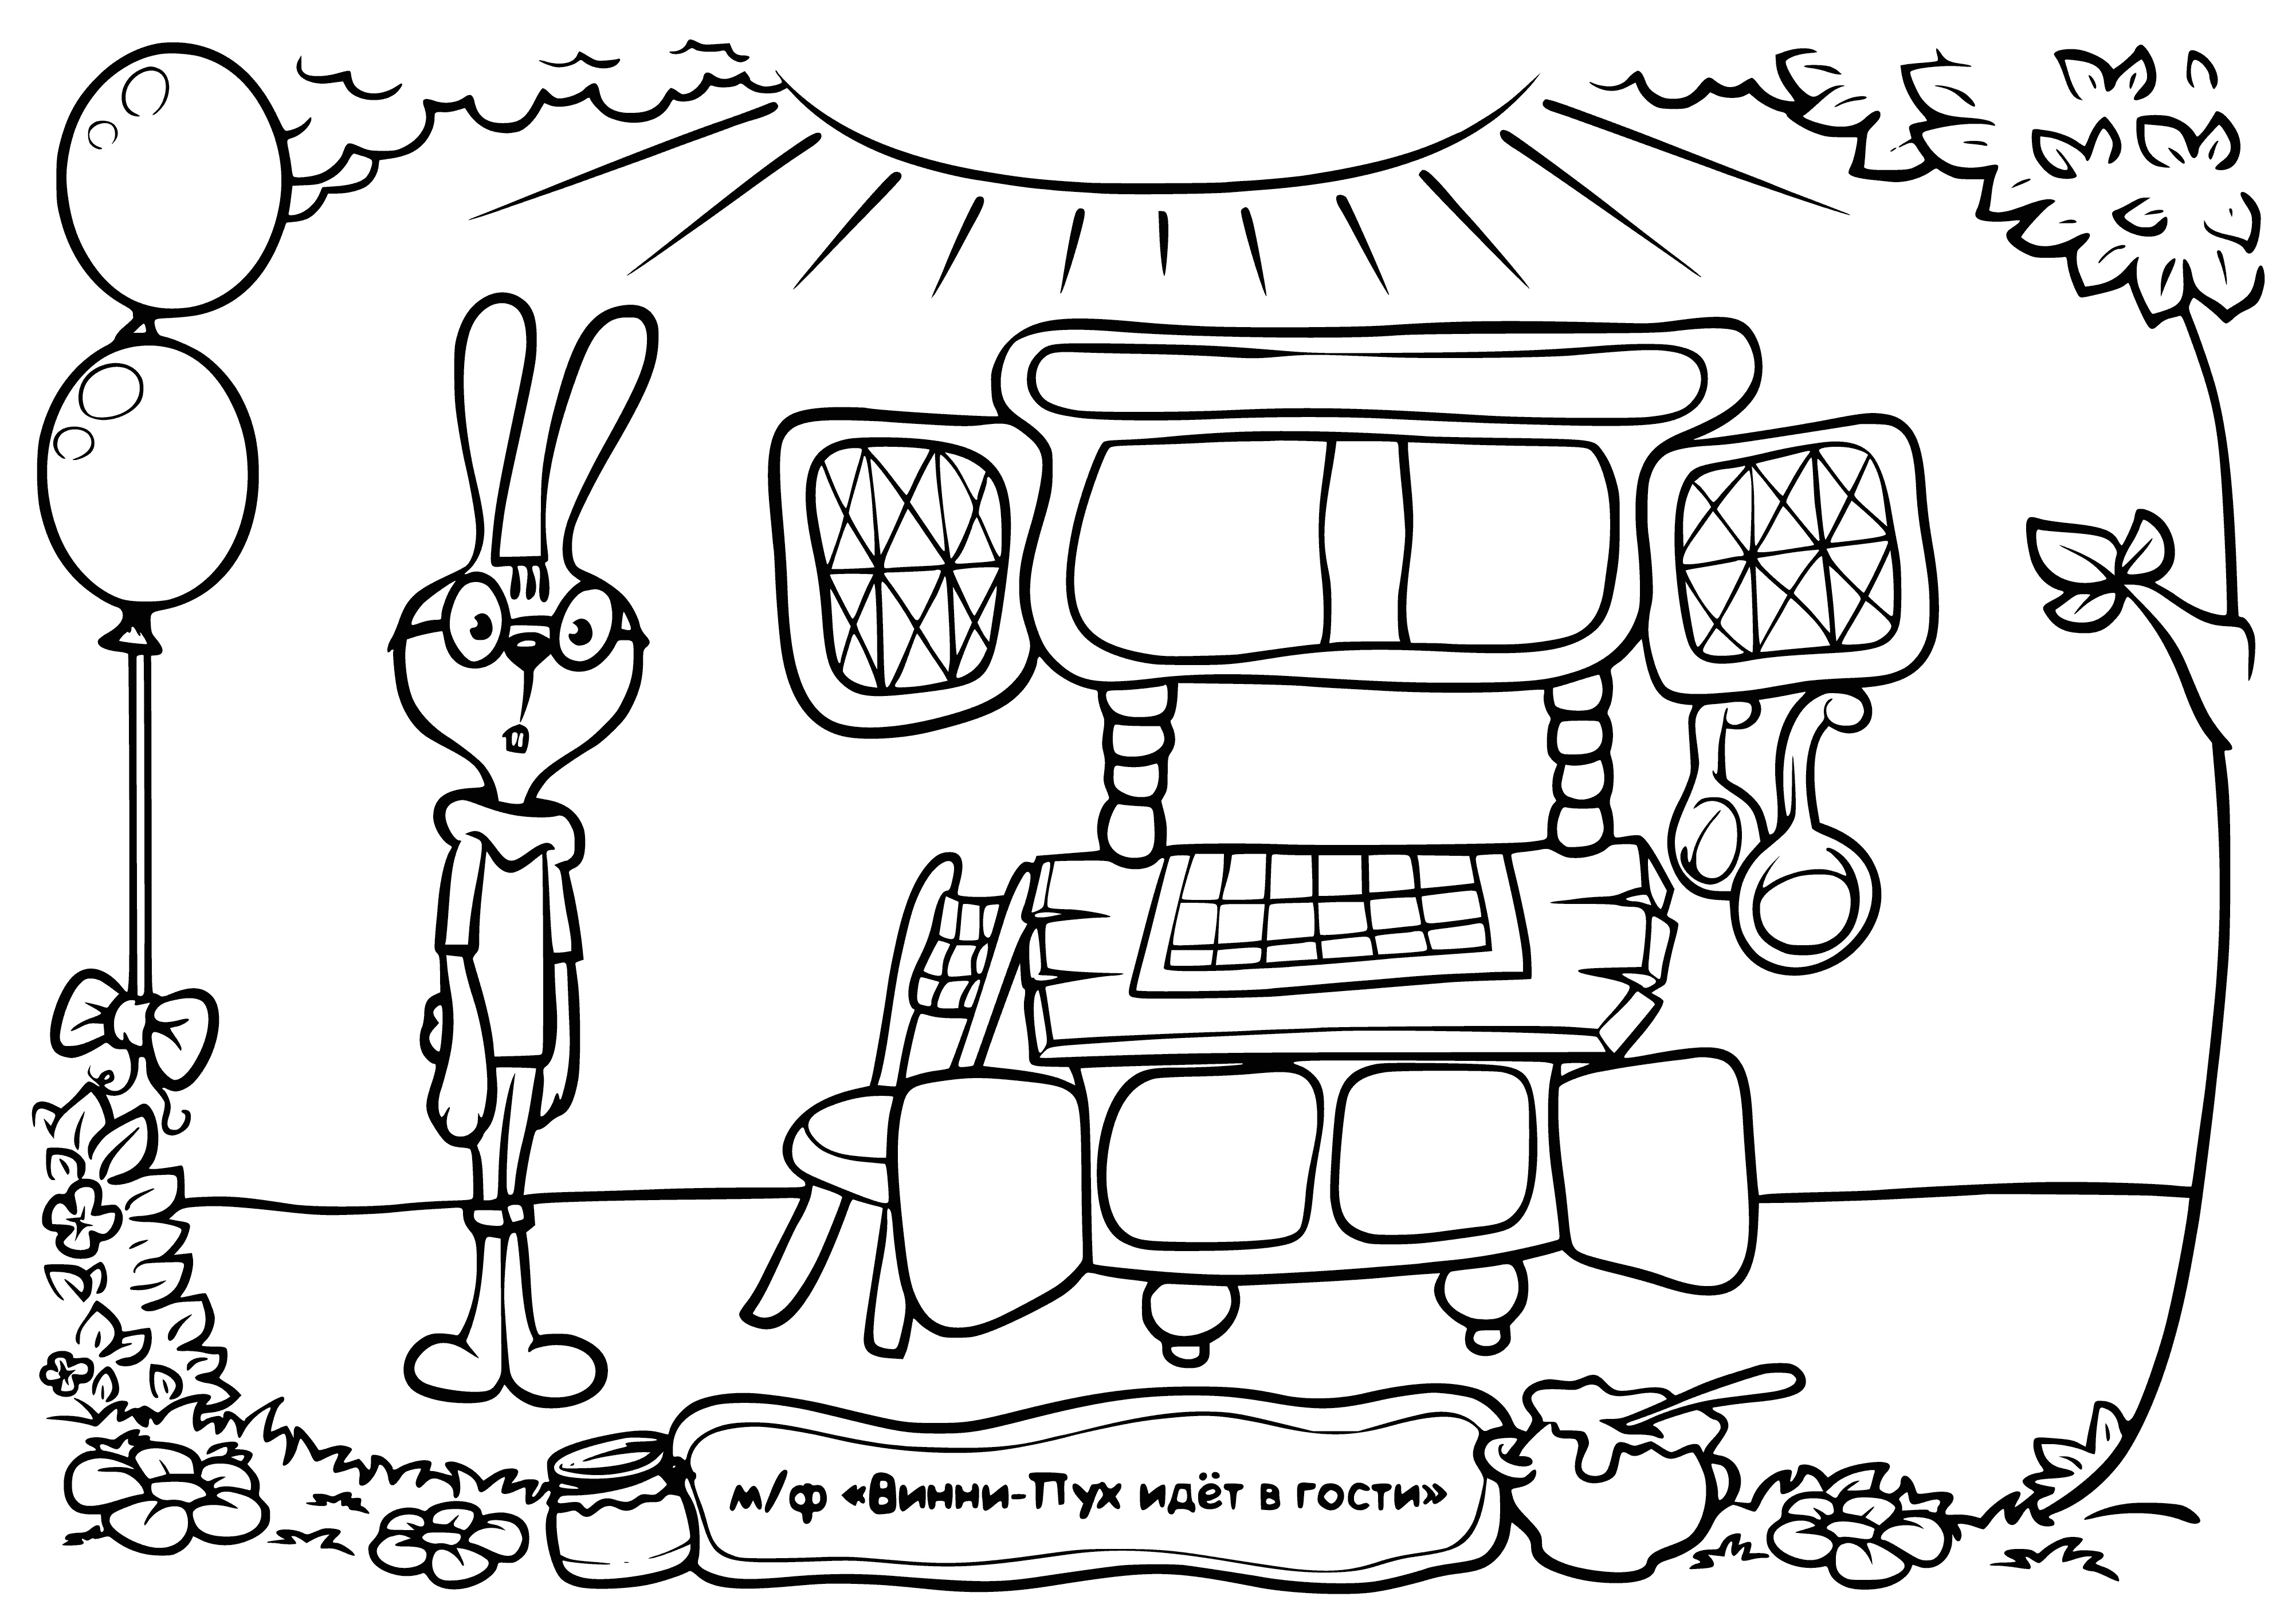 coloring page: He is pondering what is inside his heart.

Rabbit stares into the empty sideboard, pondering what lies within his heart.